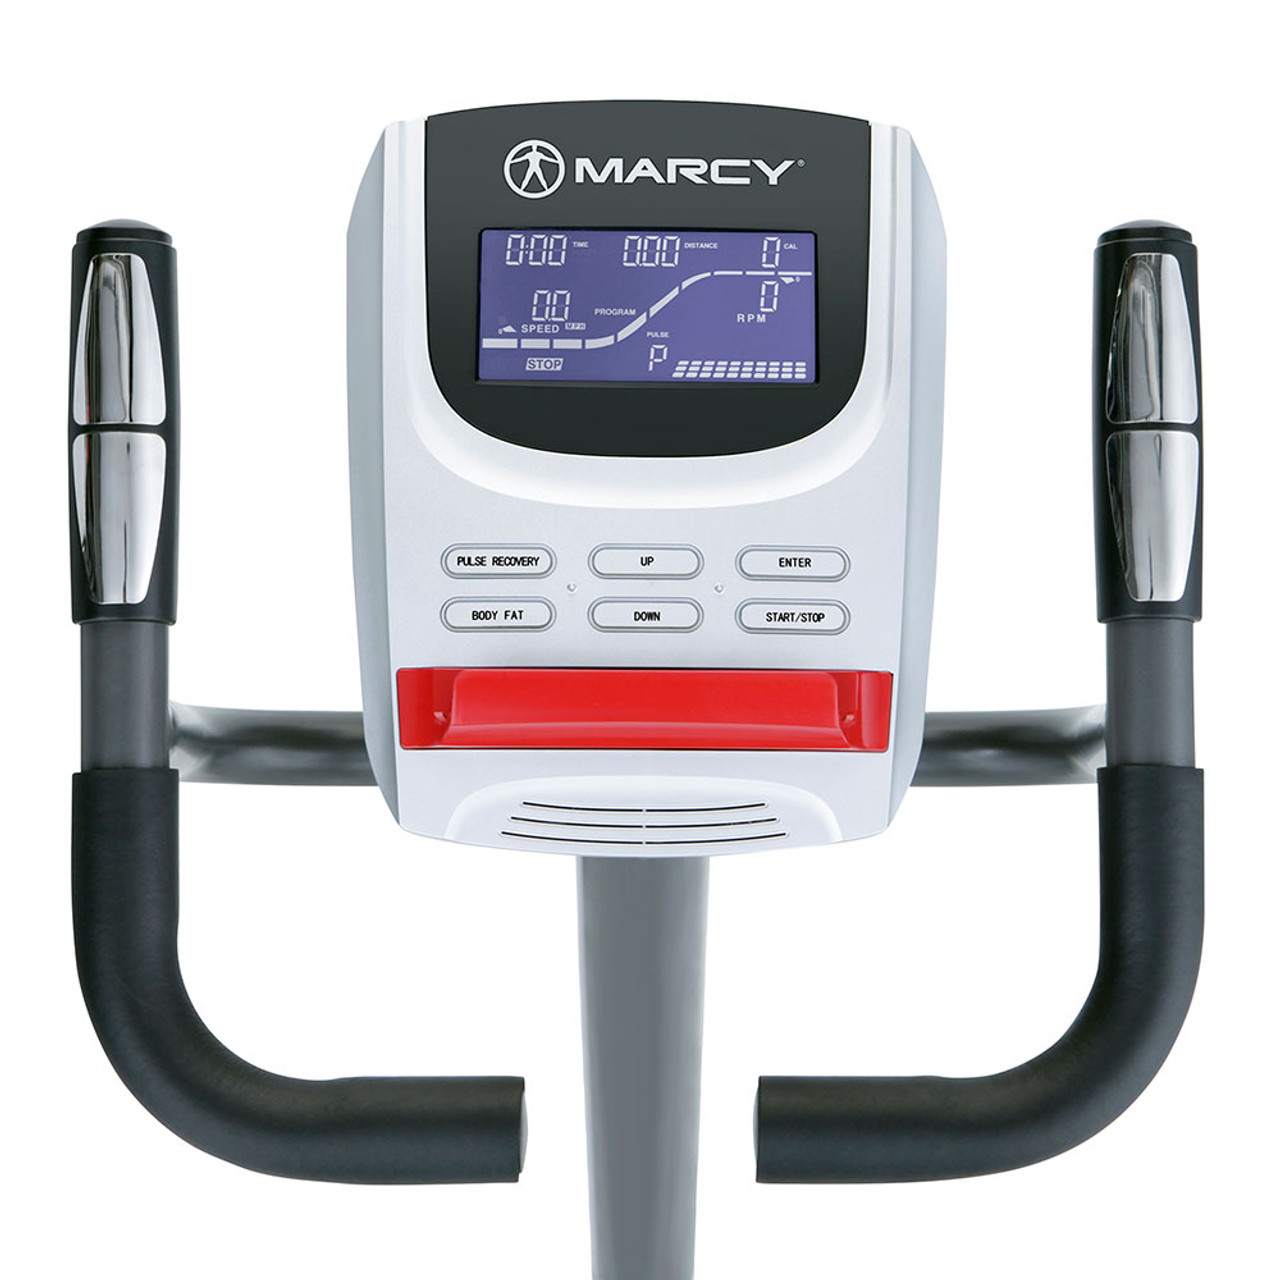  Regenerating Magnetic Upright Exercise Bike Marcy ME-702 with LCD Computer Display Screen to monitor progress